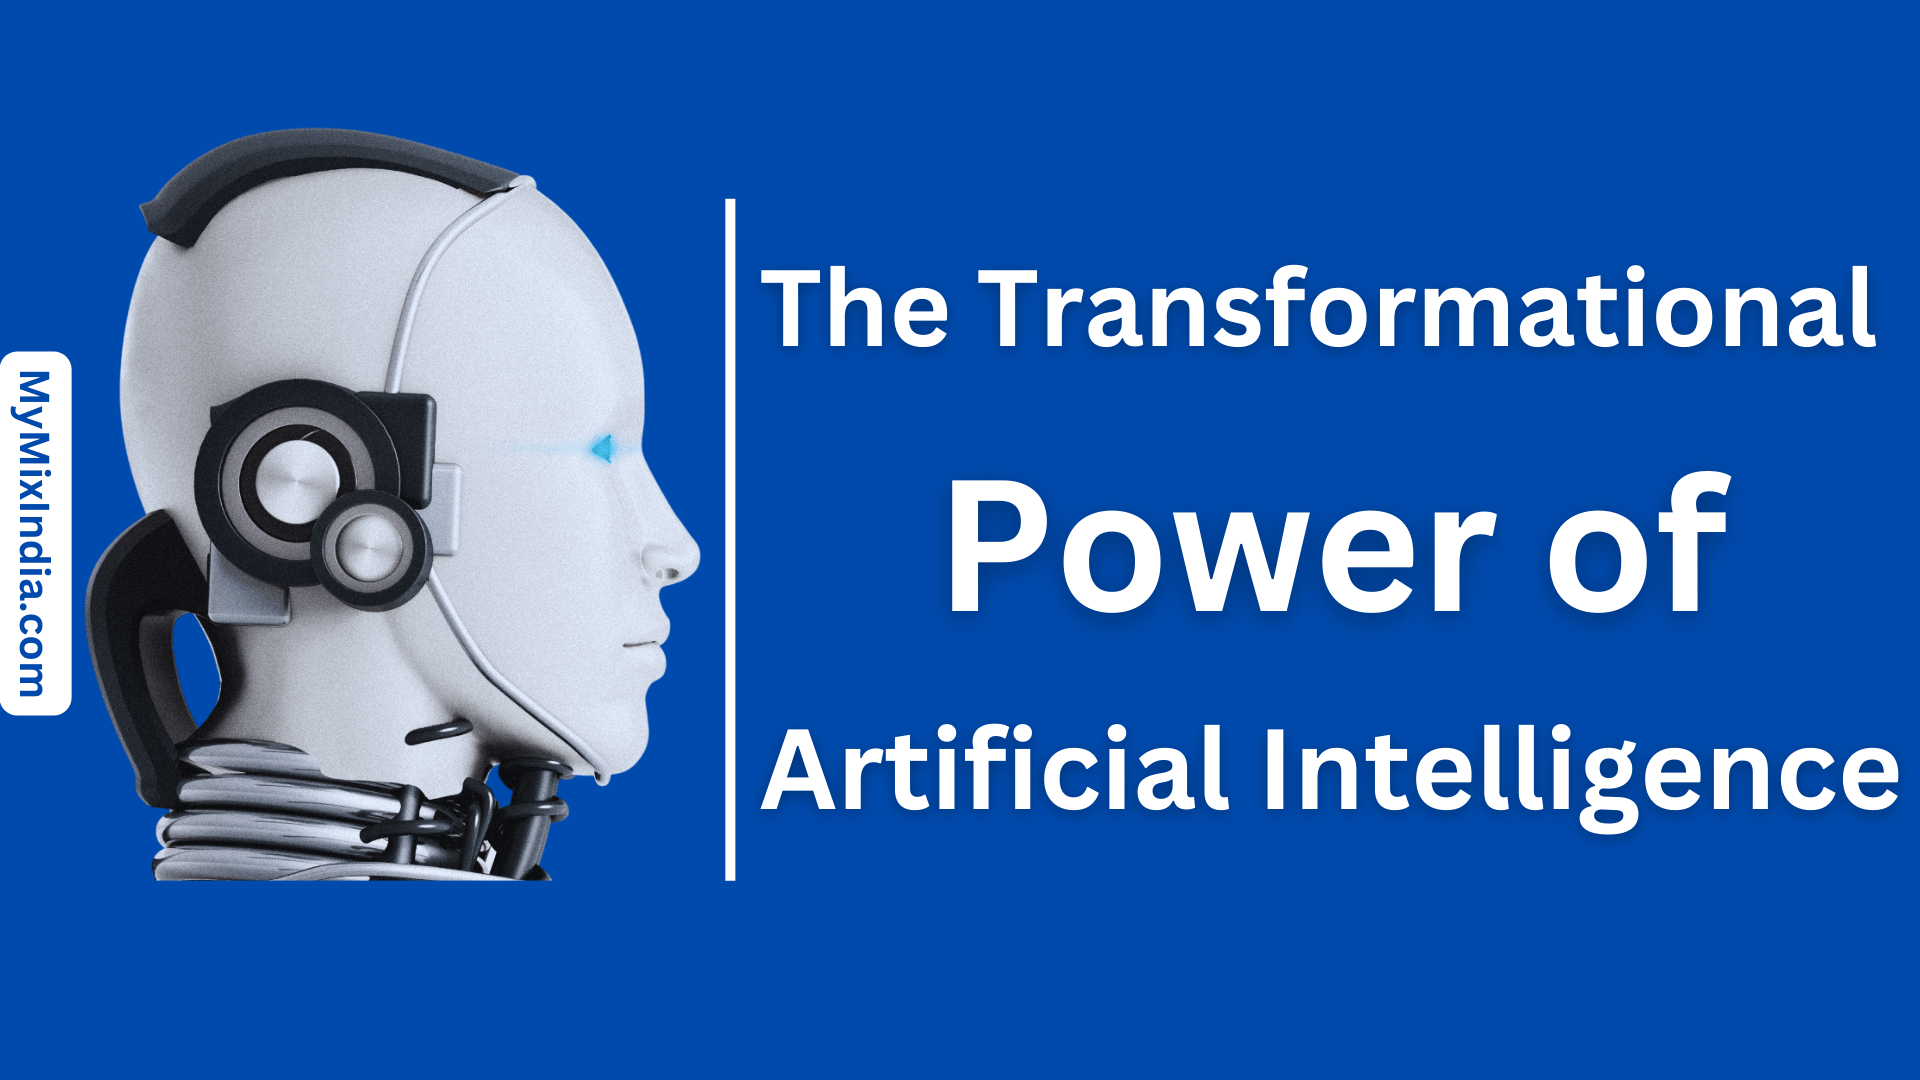 The-Transformational-Power-of-Artificial-Intelligence-mymixindia.com